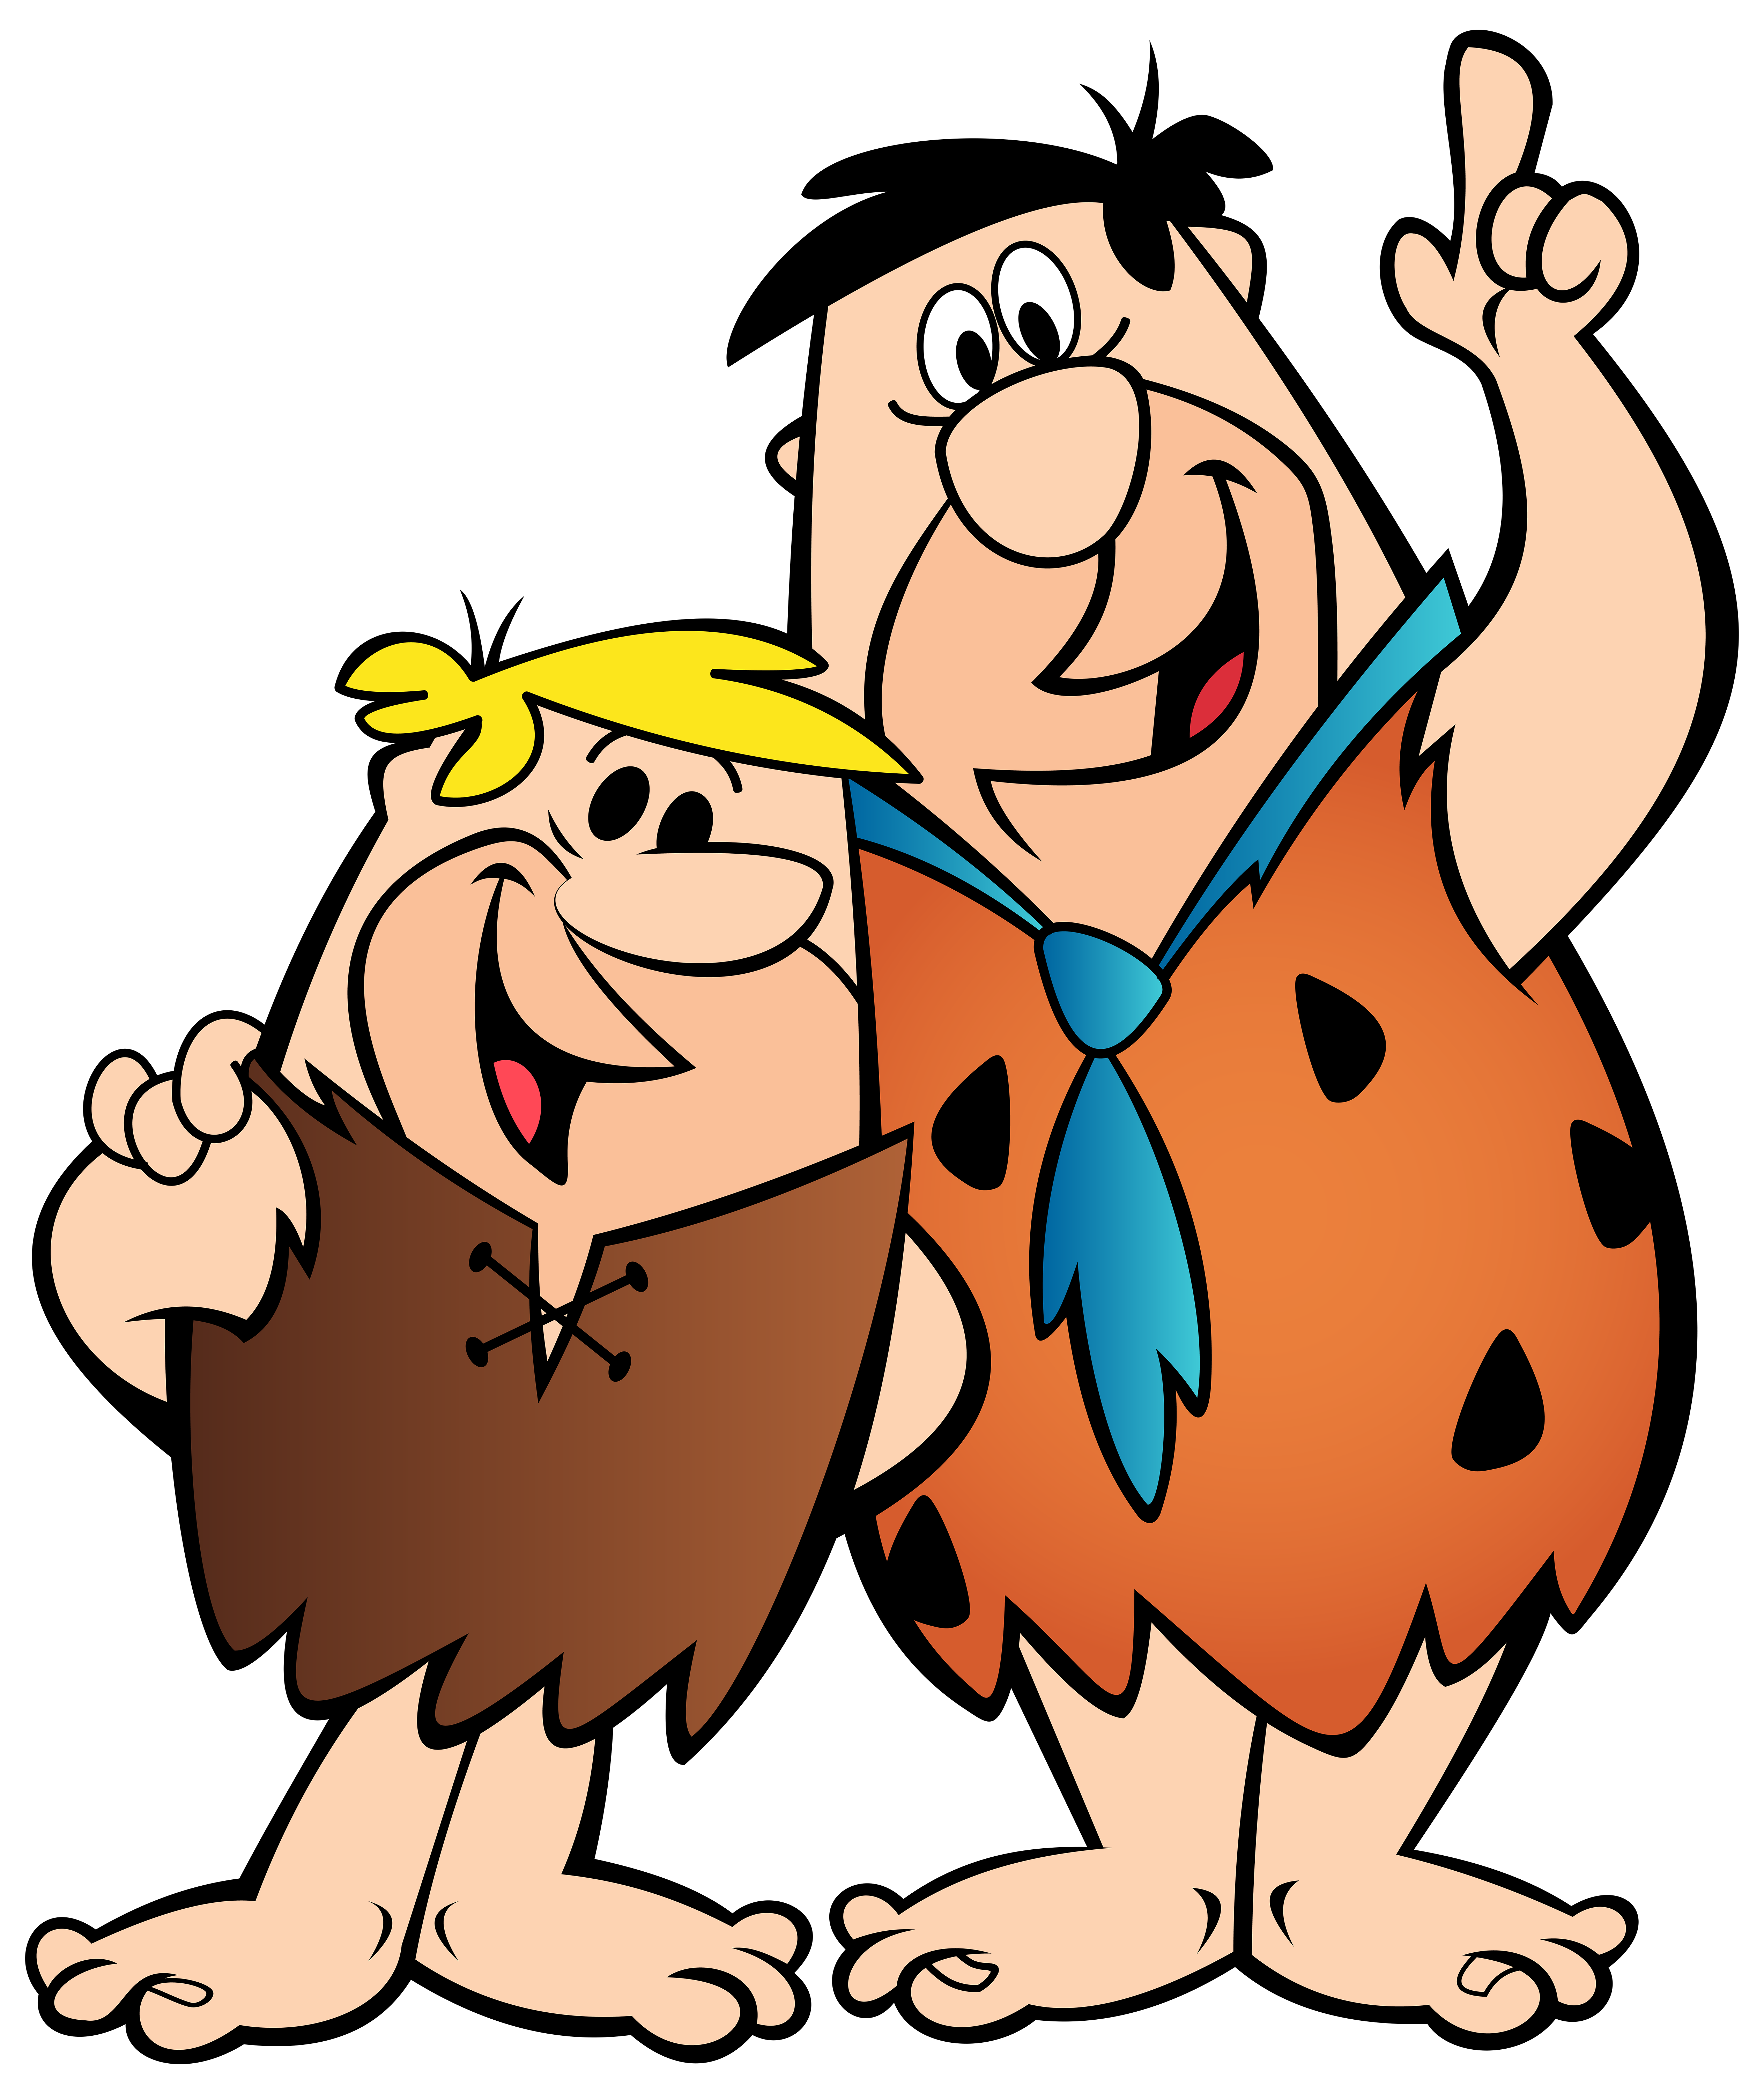 Fred Flintstone and Barney Rubble PNG Clip Art Image.